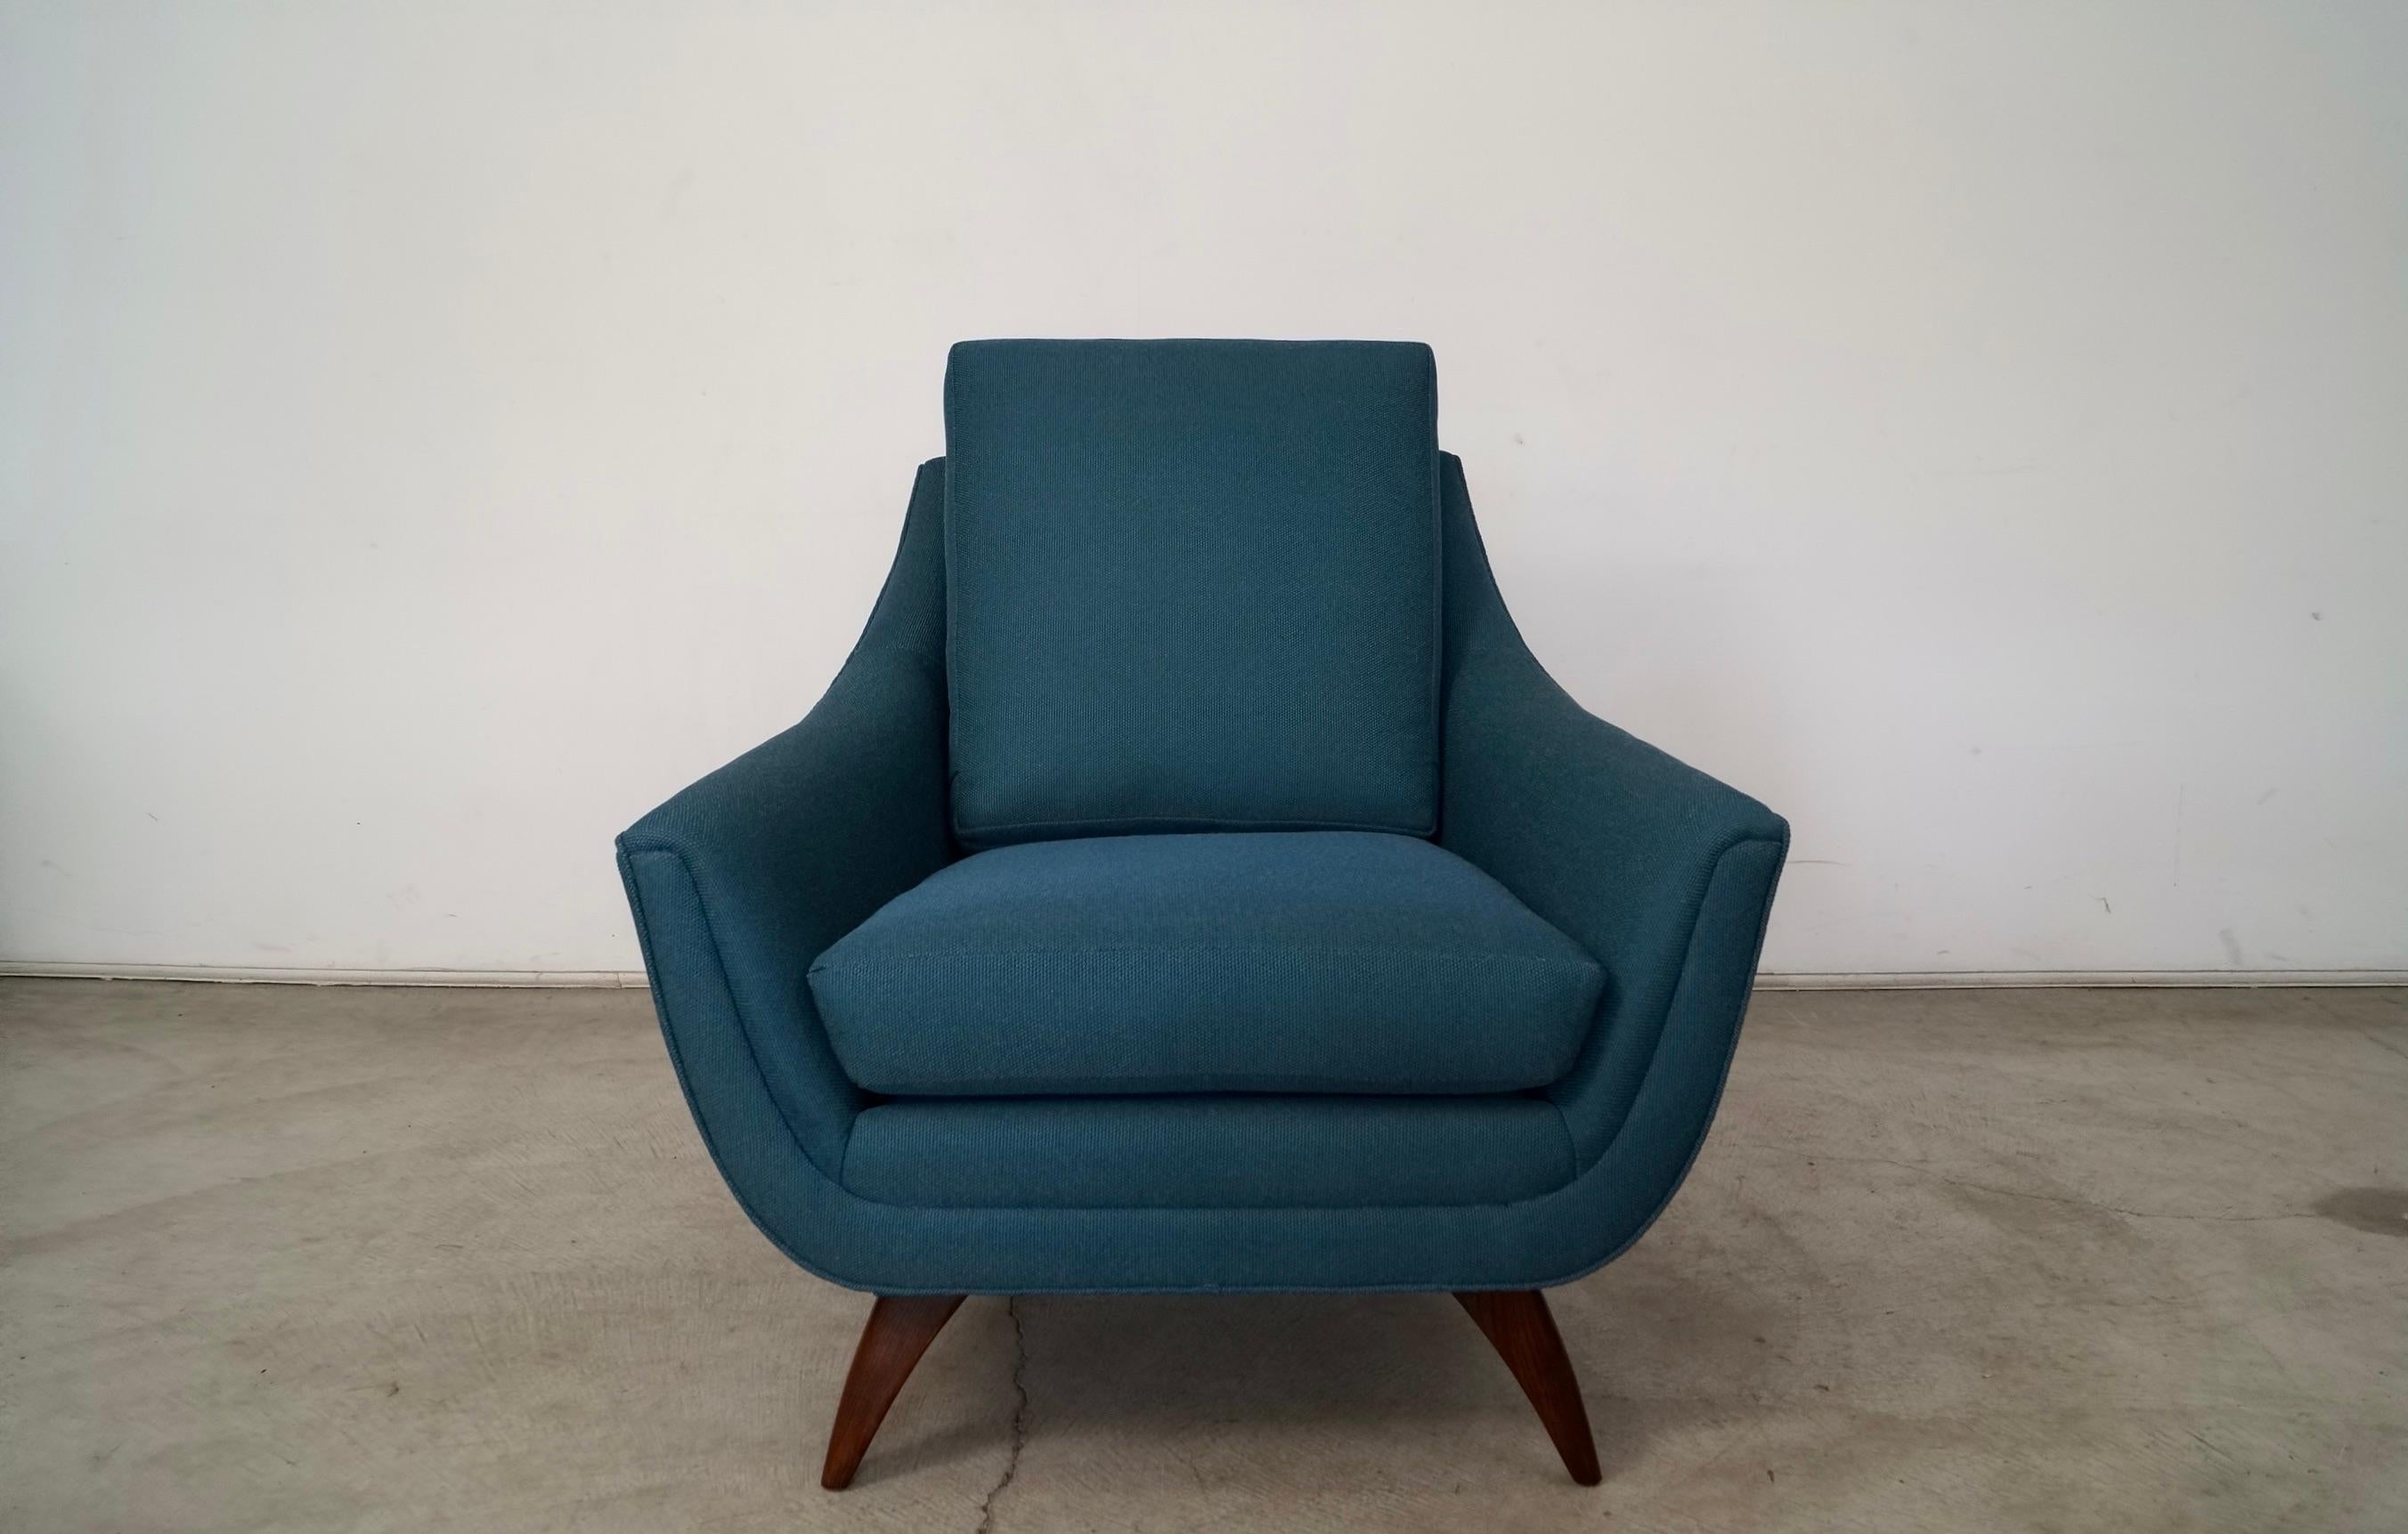 Vintage Midcentury Modern gondola lounge chair for sale. Manufactured by Prestige, in attributed to Adrian Pearsall. The legs have been professionally refinished, and it has been professionally reupholstered in new fabric and foam. Very special